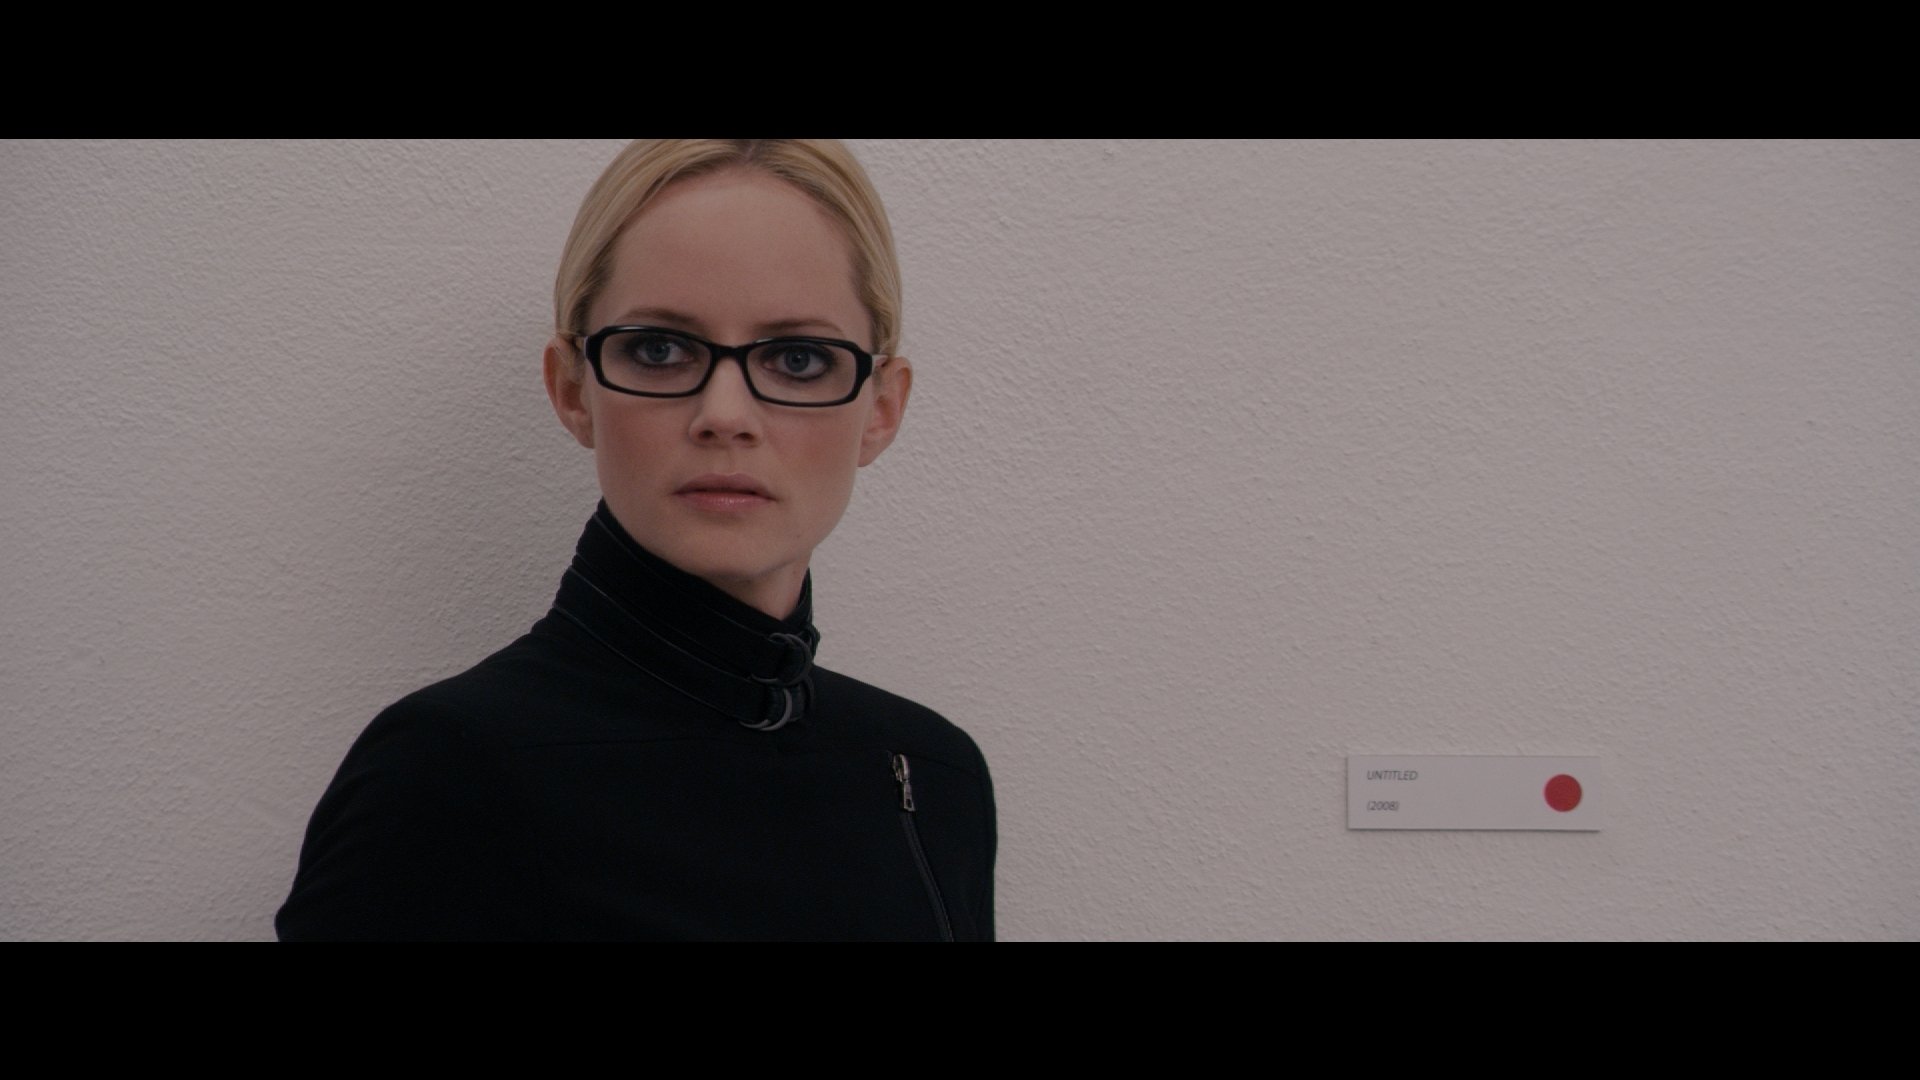 Marley Shelton makes a sale as a New York art gallerist in the new film, (Untitled).